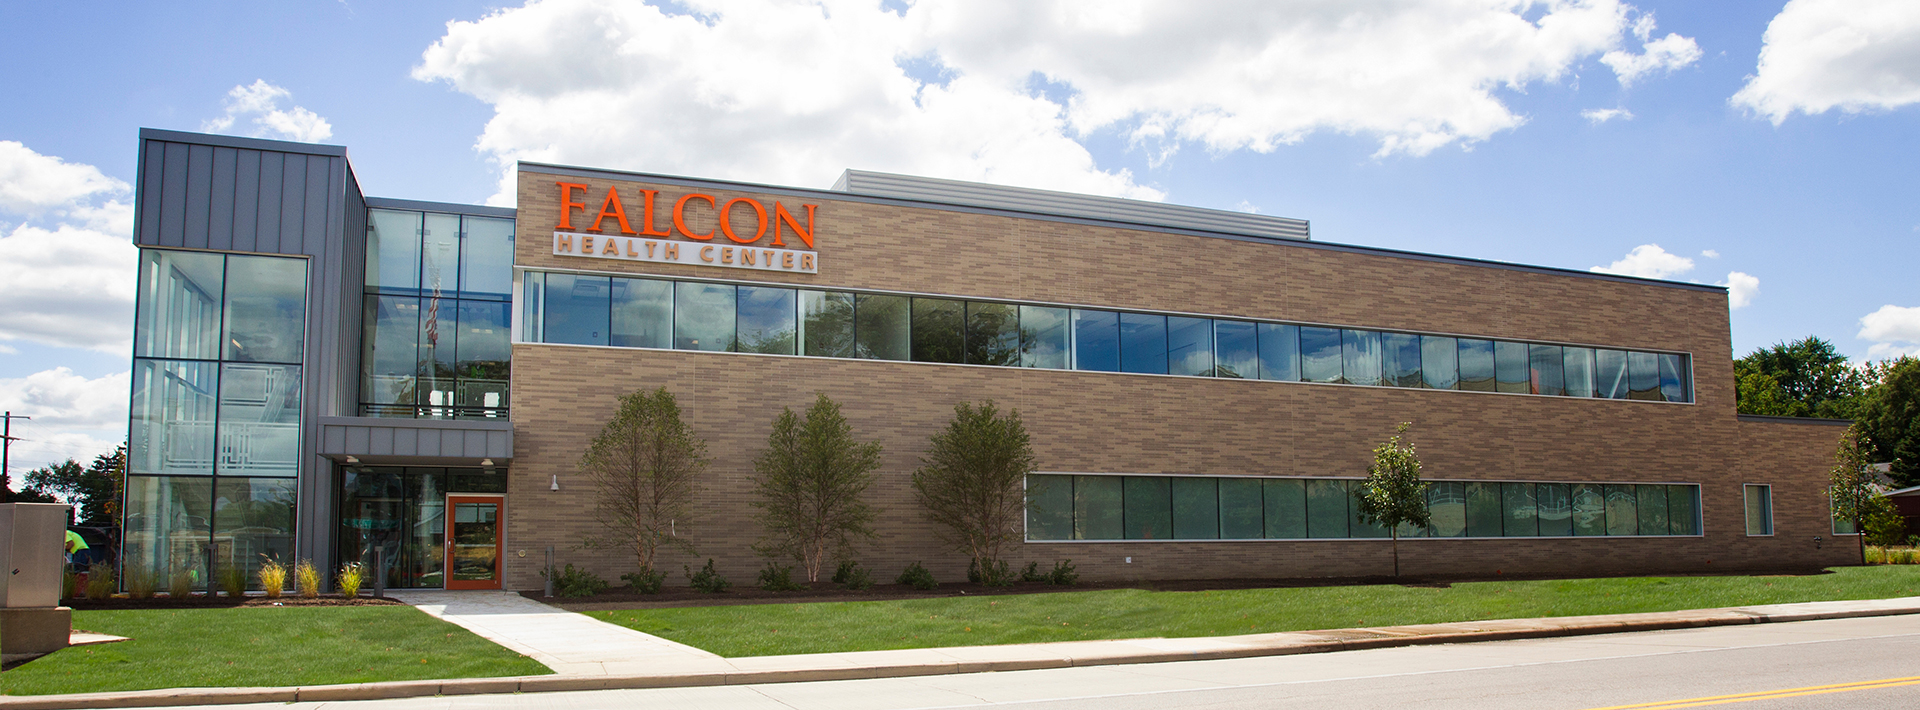 Falcon Health Center Extends Hours & Services